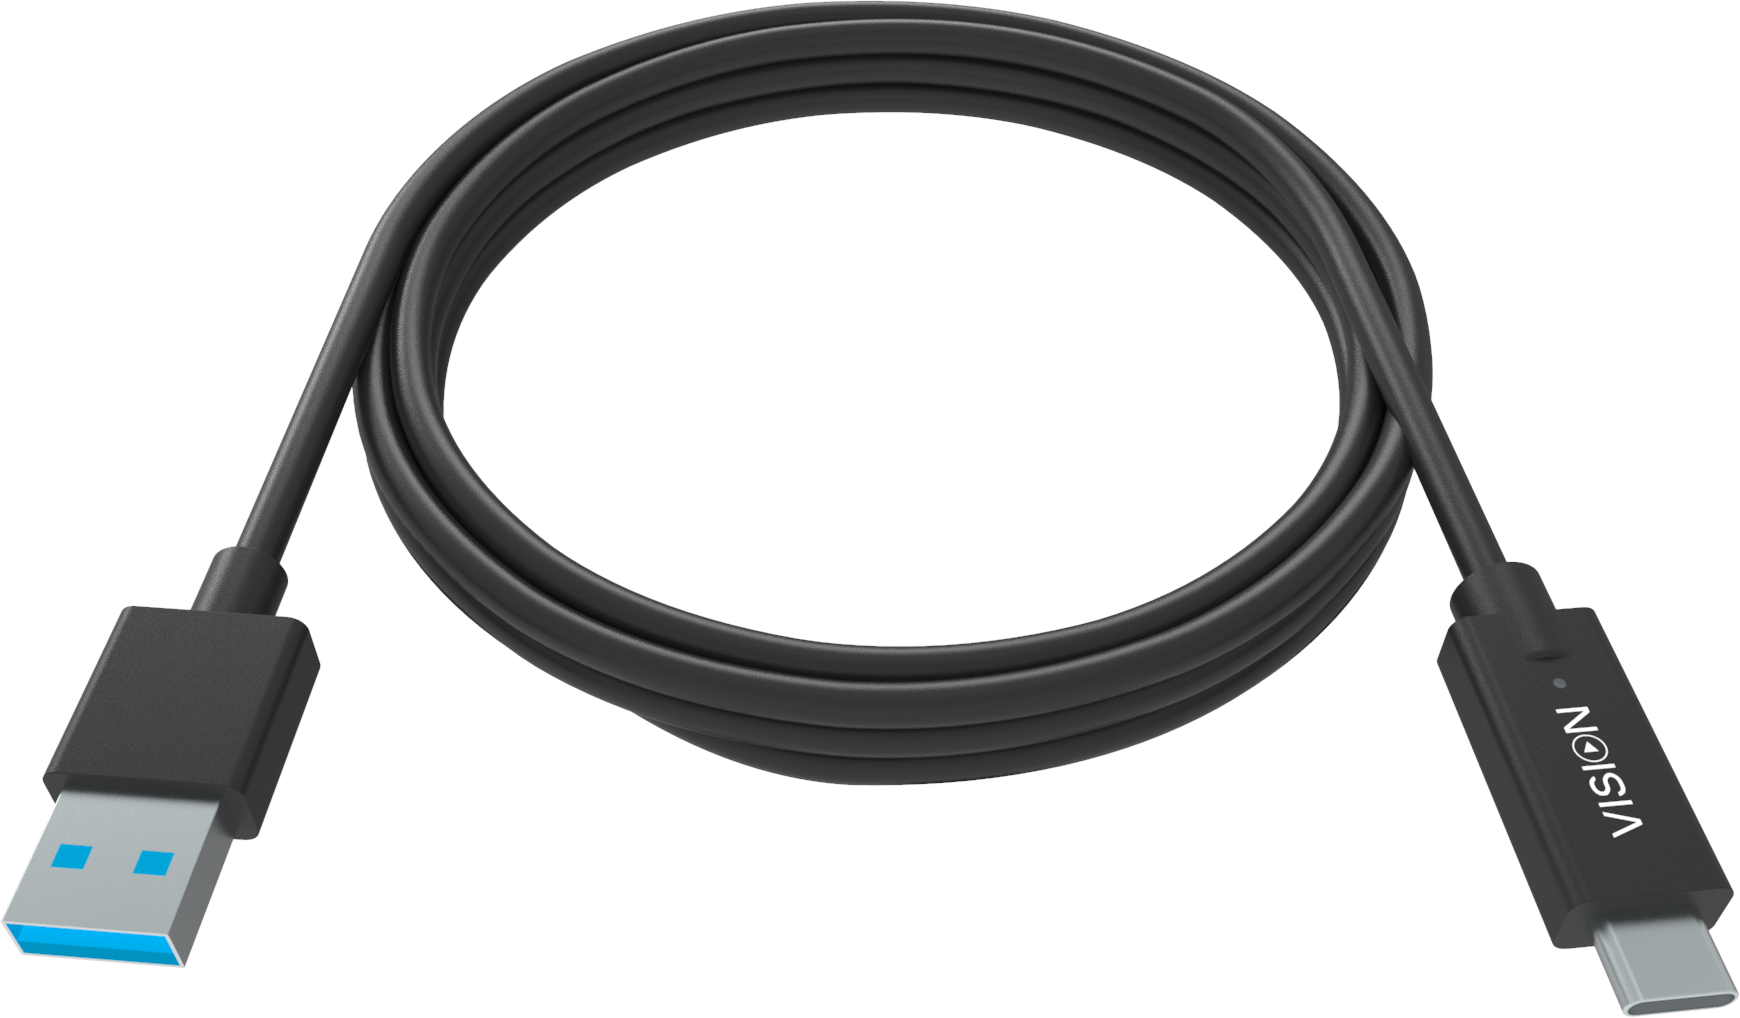 An image showing Black USB-C to USB 3.0A Cable 2m (6.5ft)